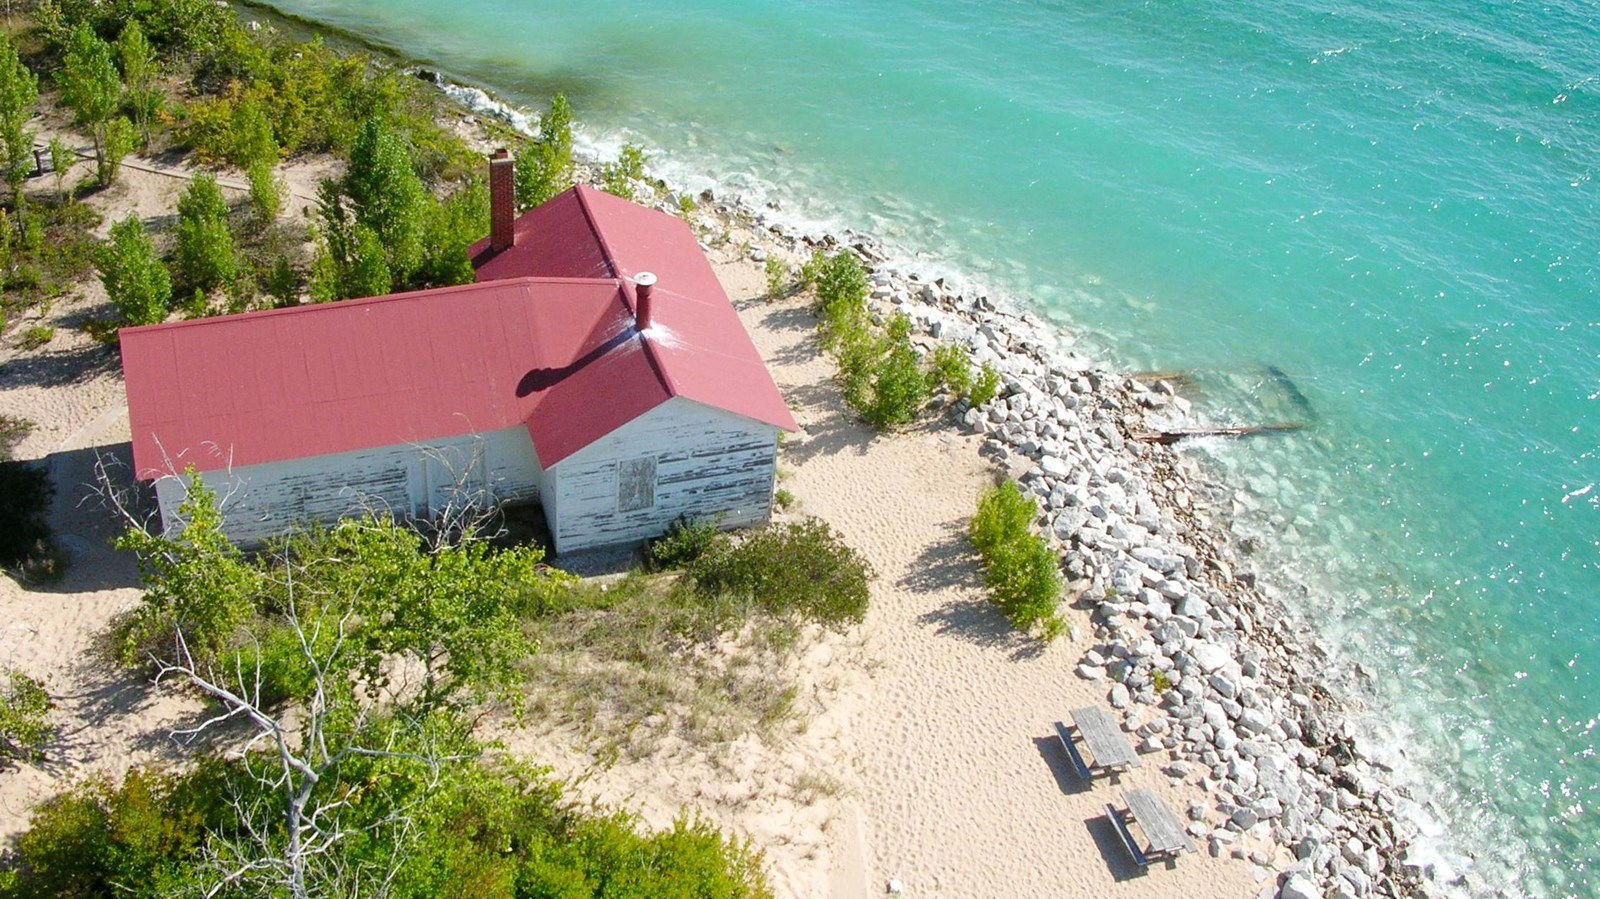 Looking down to red-roofed t-shaped building on beach alongside turquoise water